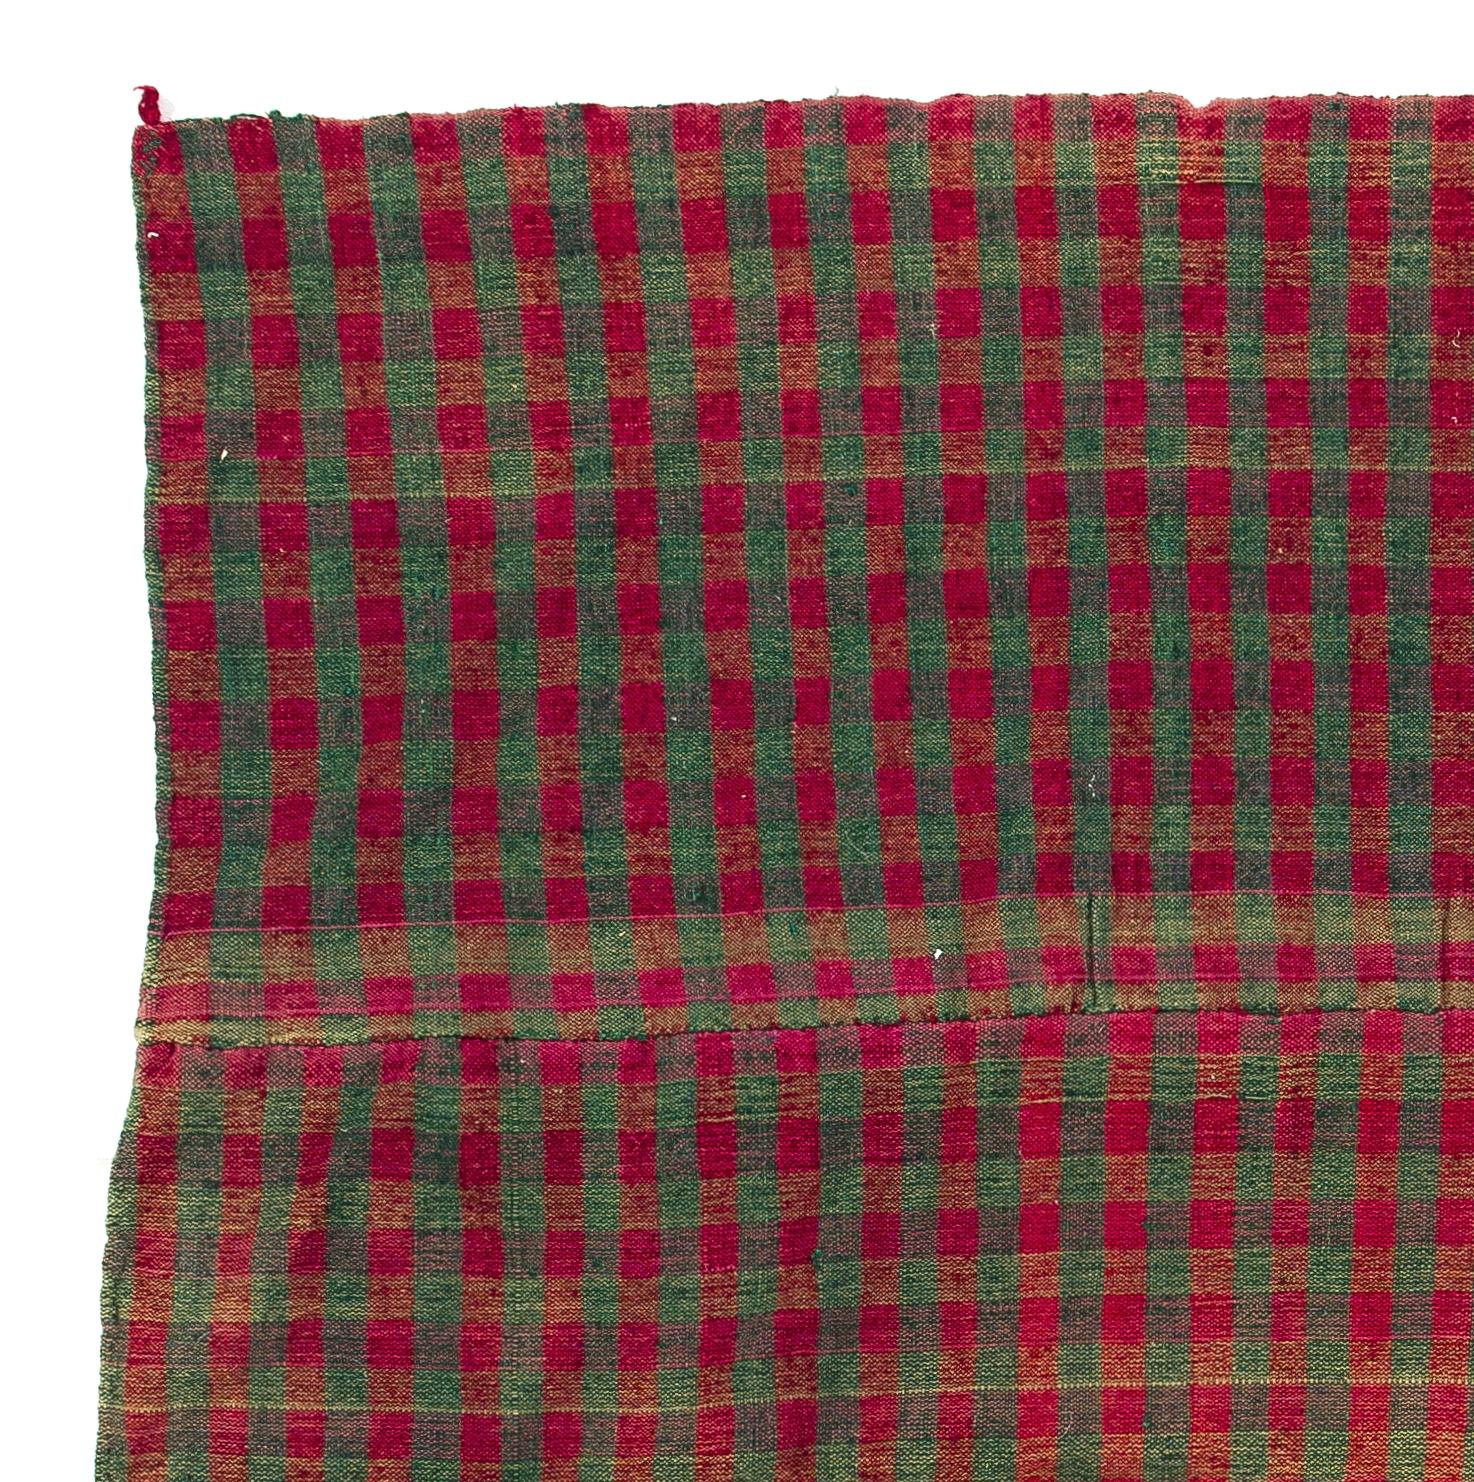 Vintage checkered Turkish flat-weave Kilim rug in red and green color. Measures: 4.4 x 5 ft.

This beautiful and simple weaving is sturdy and clean, it can be used on the floor as a rug or as a bed cover, sofa throw or wall hanging. It is soft and